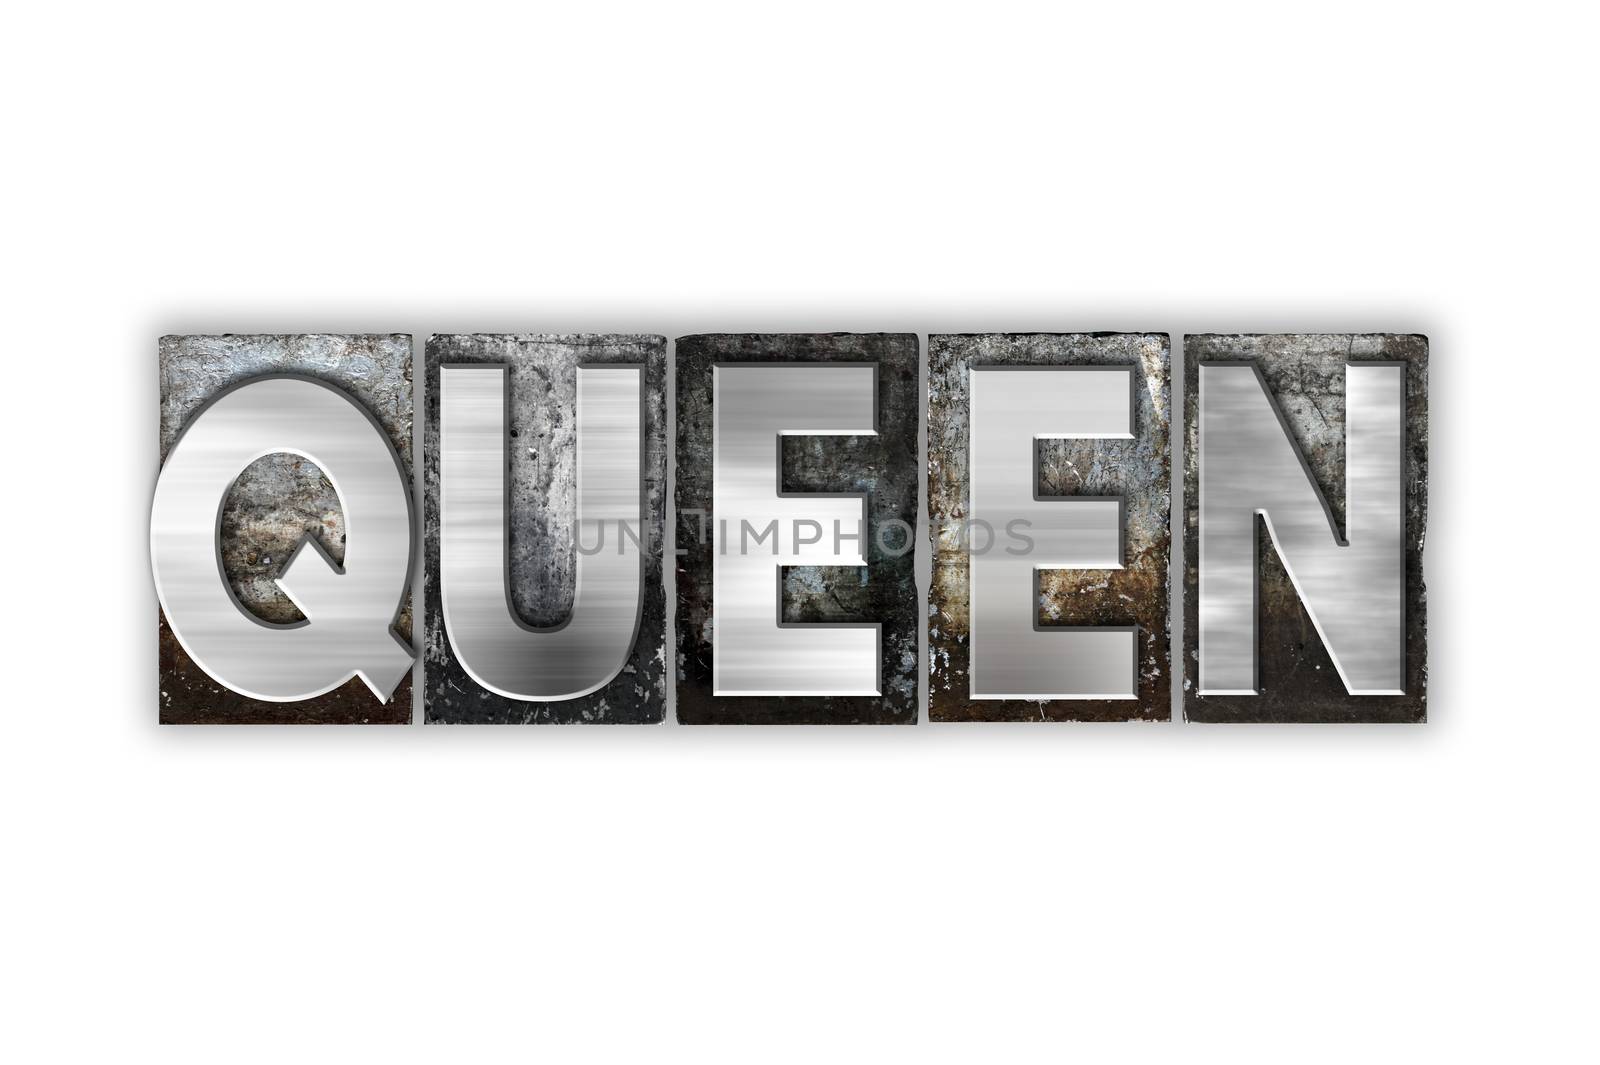 Queen Concept Isolated Metal Letterpress Type by enterlinedesign